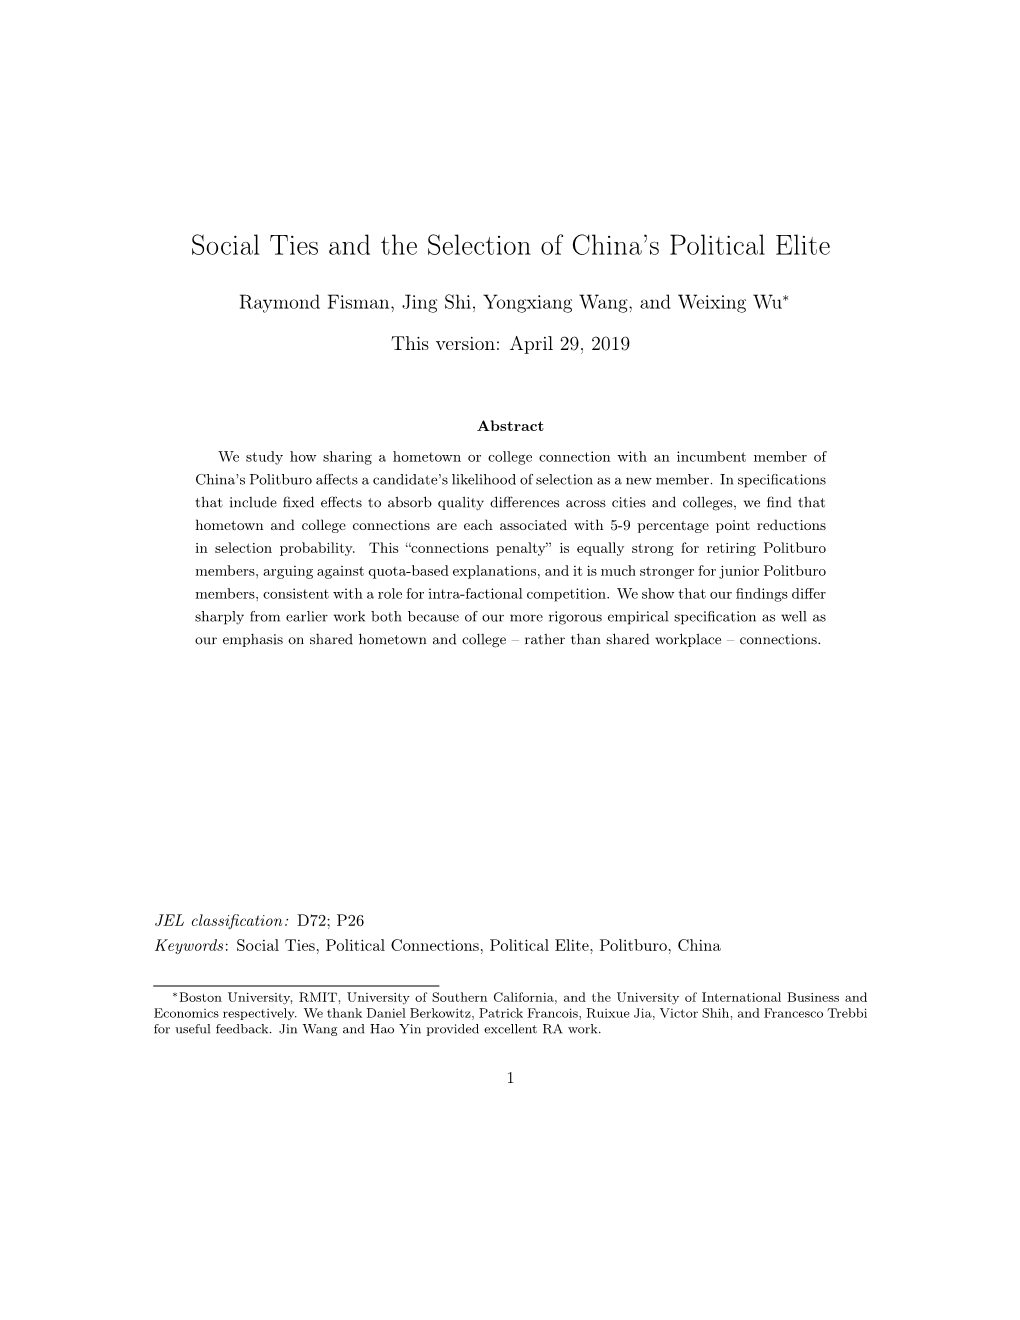 Social Ties and the Selection of China's Political Elite